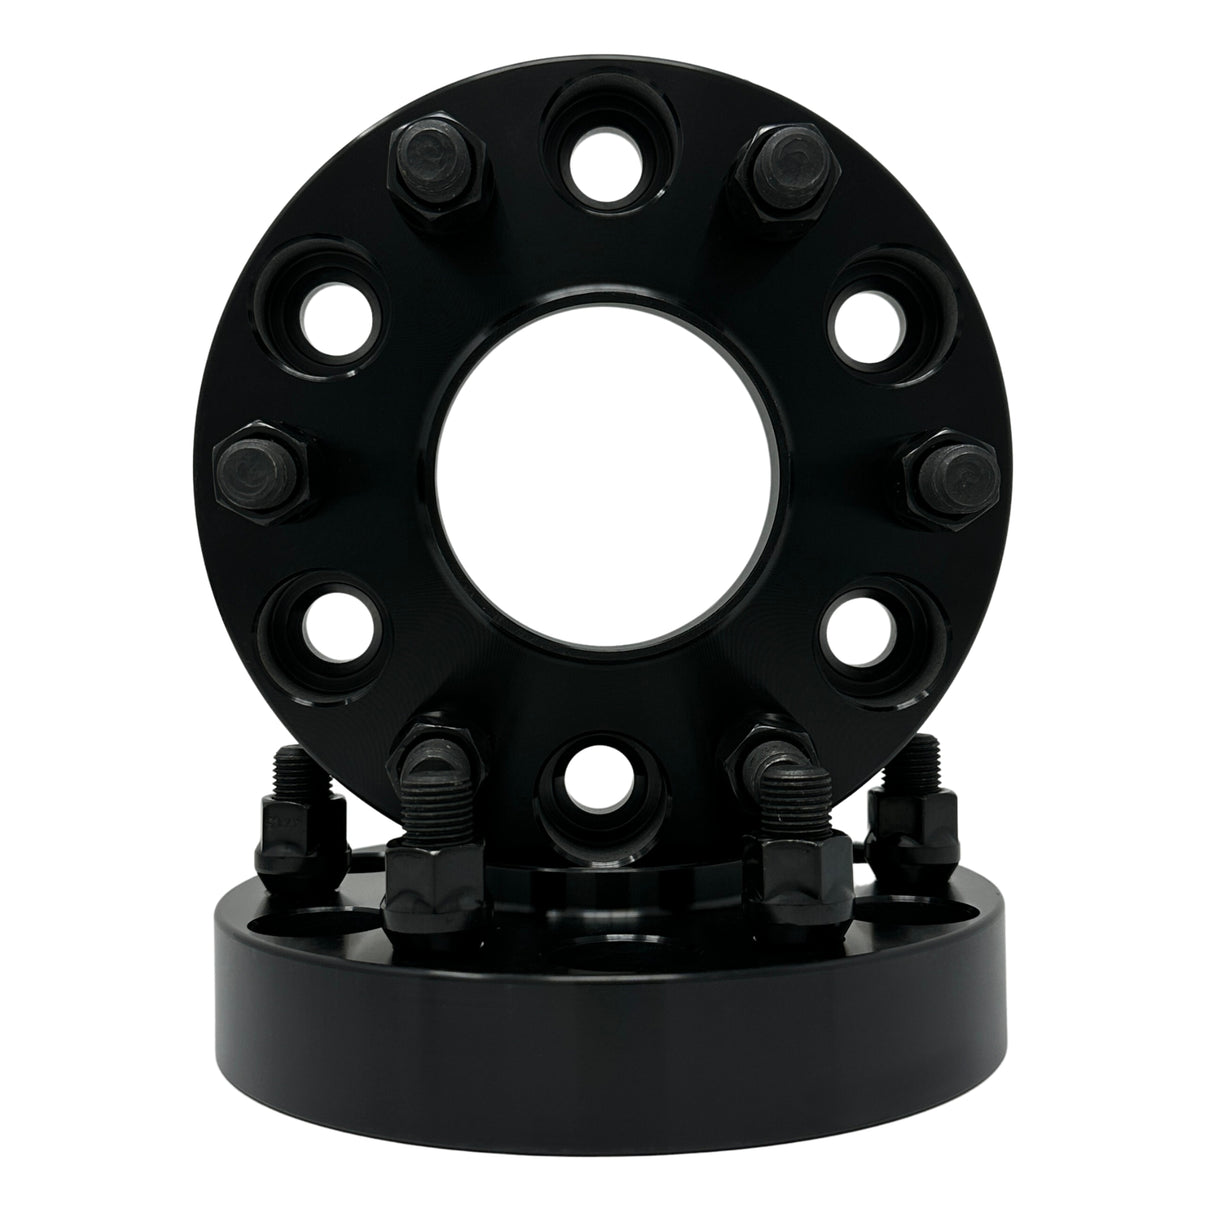 6x4.5 Hub Centric Wheel Spacer 1.25" Inch (32mm) Nissan Frontier, Pathfinder, Xterra 12x1.25 Studs & Lug Nuts 66.1mm Center Bore Also known as 6x114.3